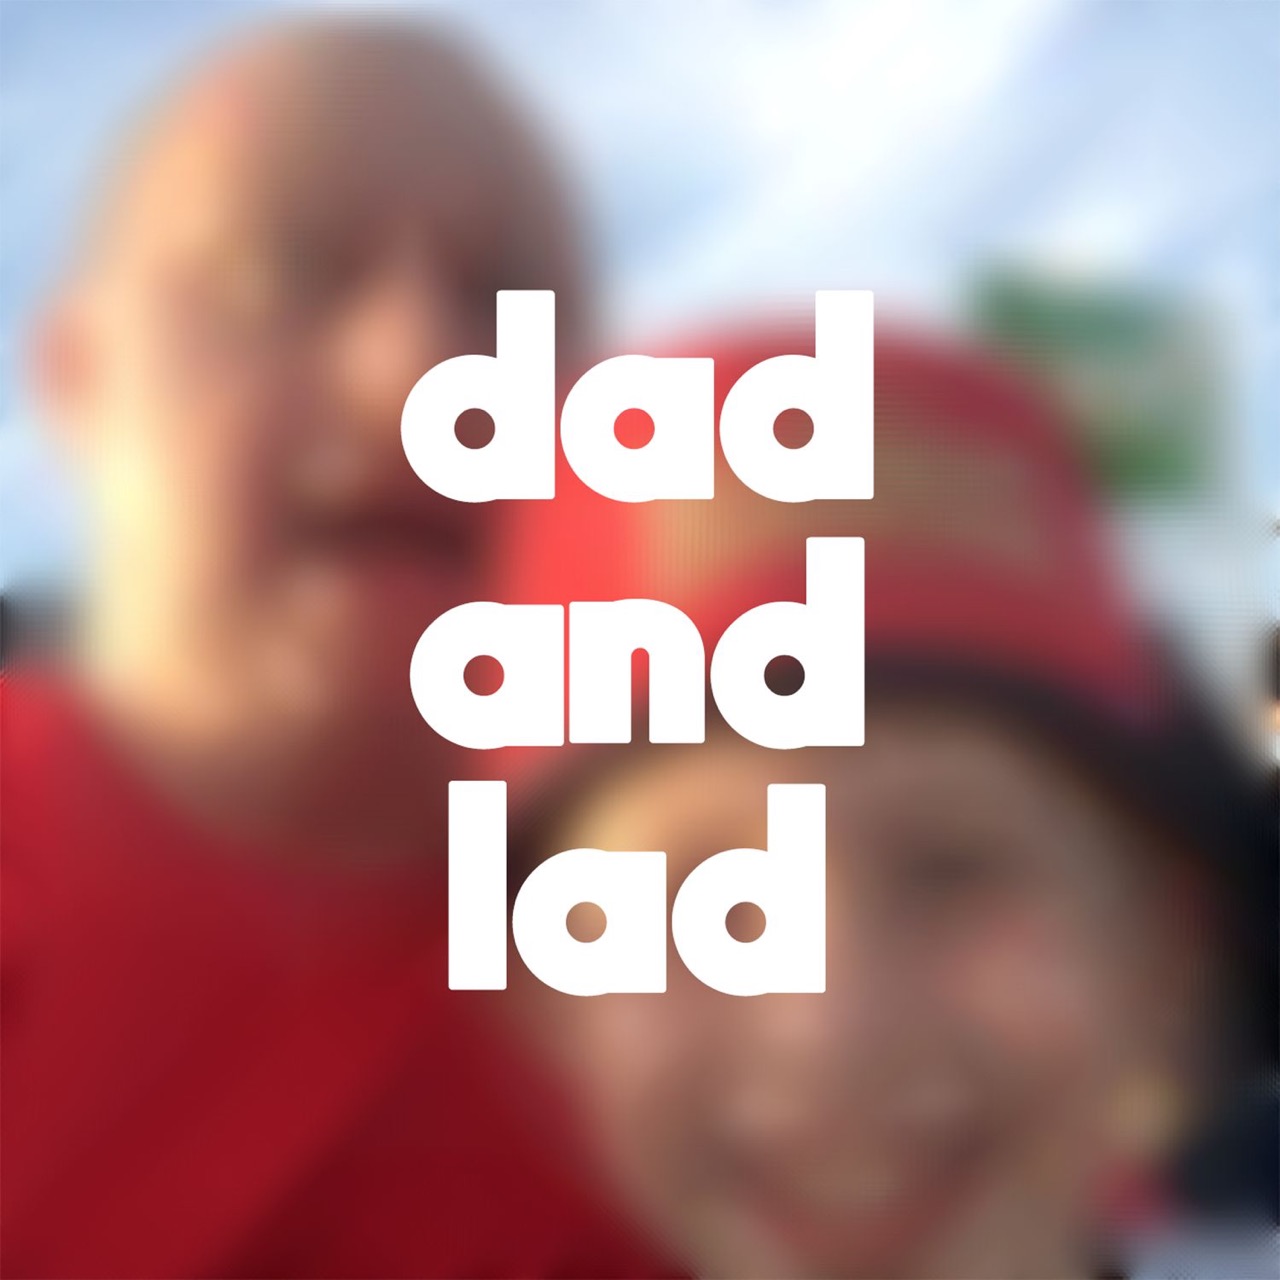 Daddy last. Dads and lads.